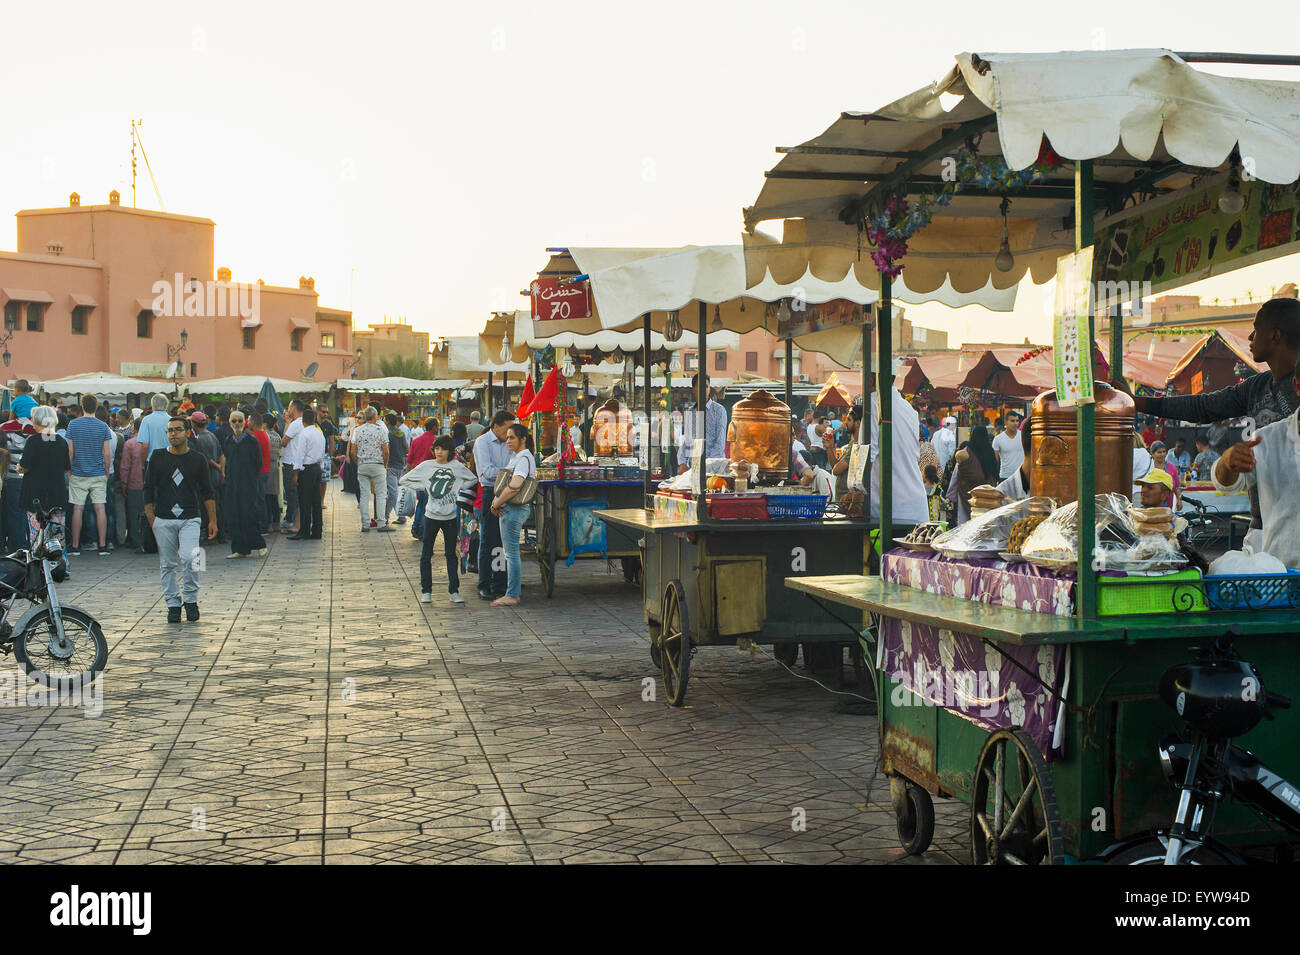 People and stalls selling food, Djemaa el Fna square, UNESCO World Heritage site, Marrakech, Morocco Stock Photo